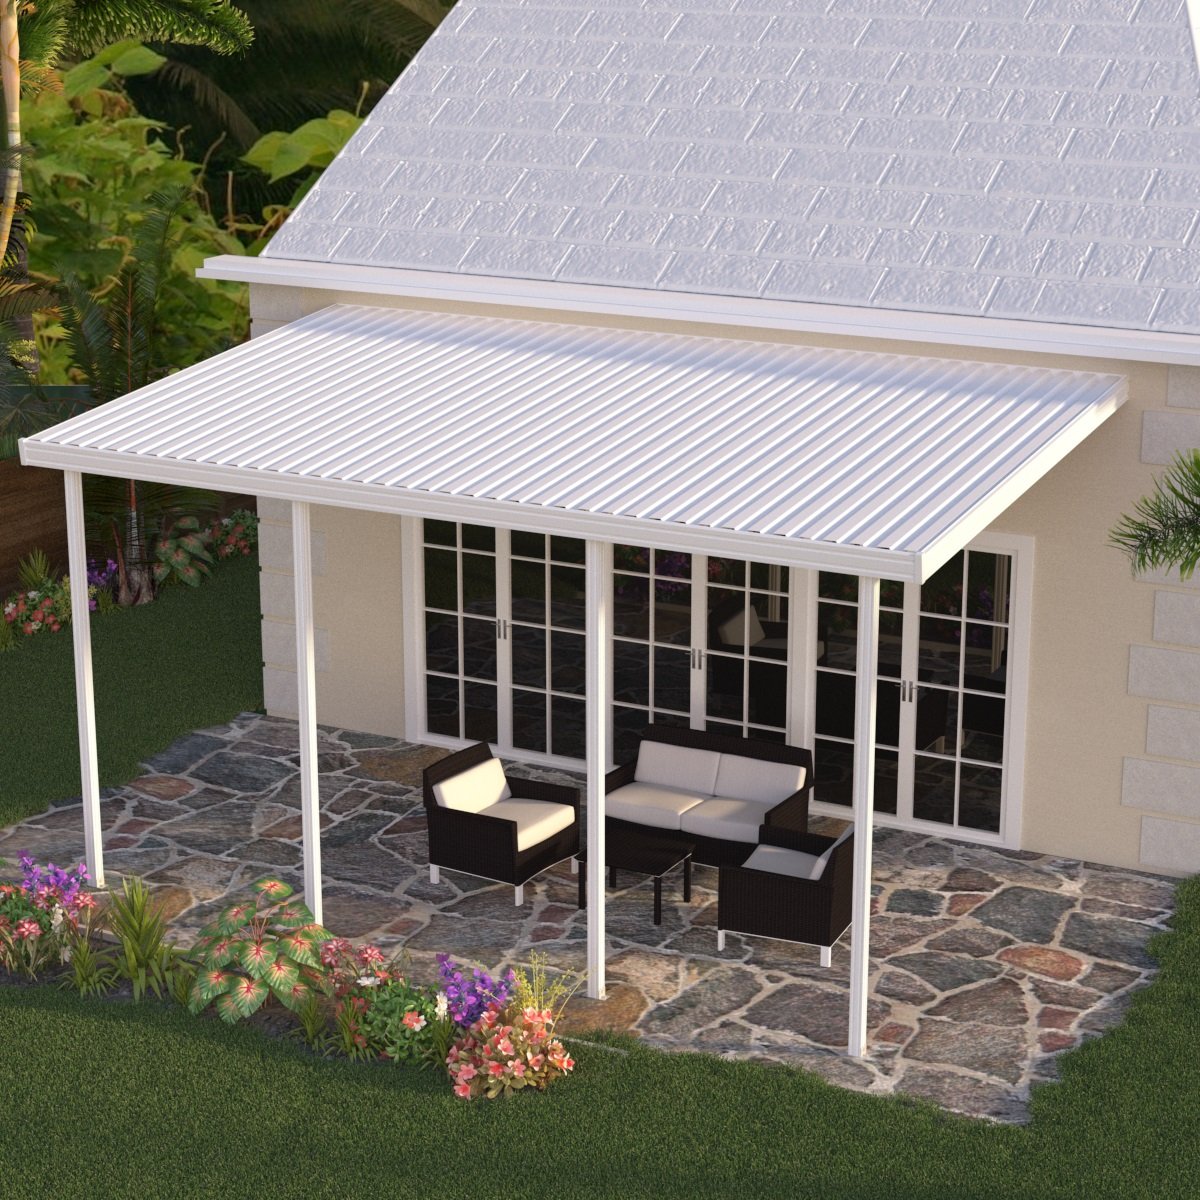 14 ft. Deep x 26 ft. Wide White Attached Aluminum Patio Cover -4 Posts - (10lb Low Snow Area)